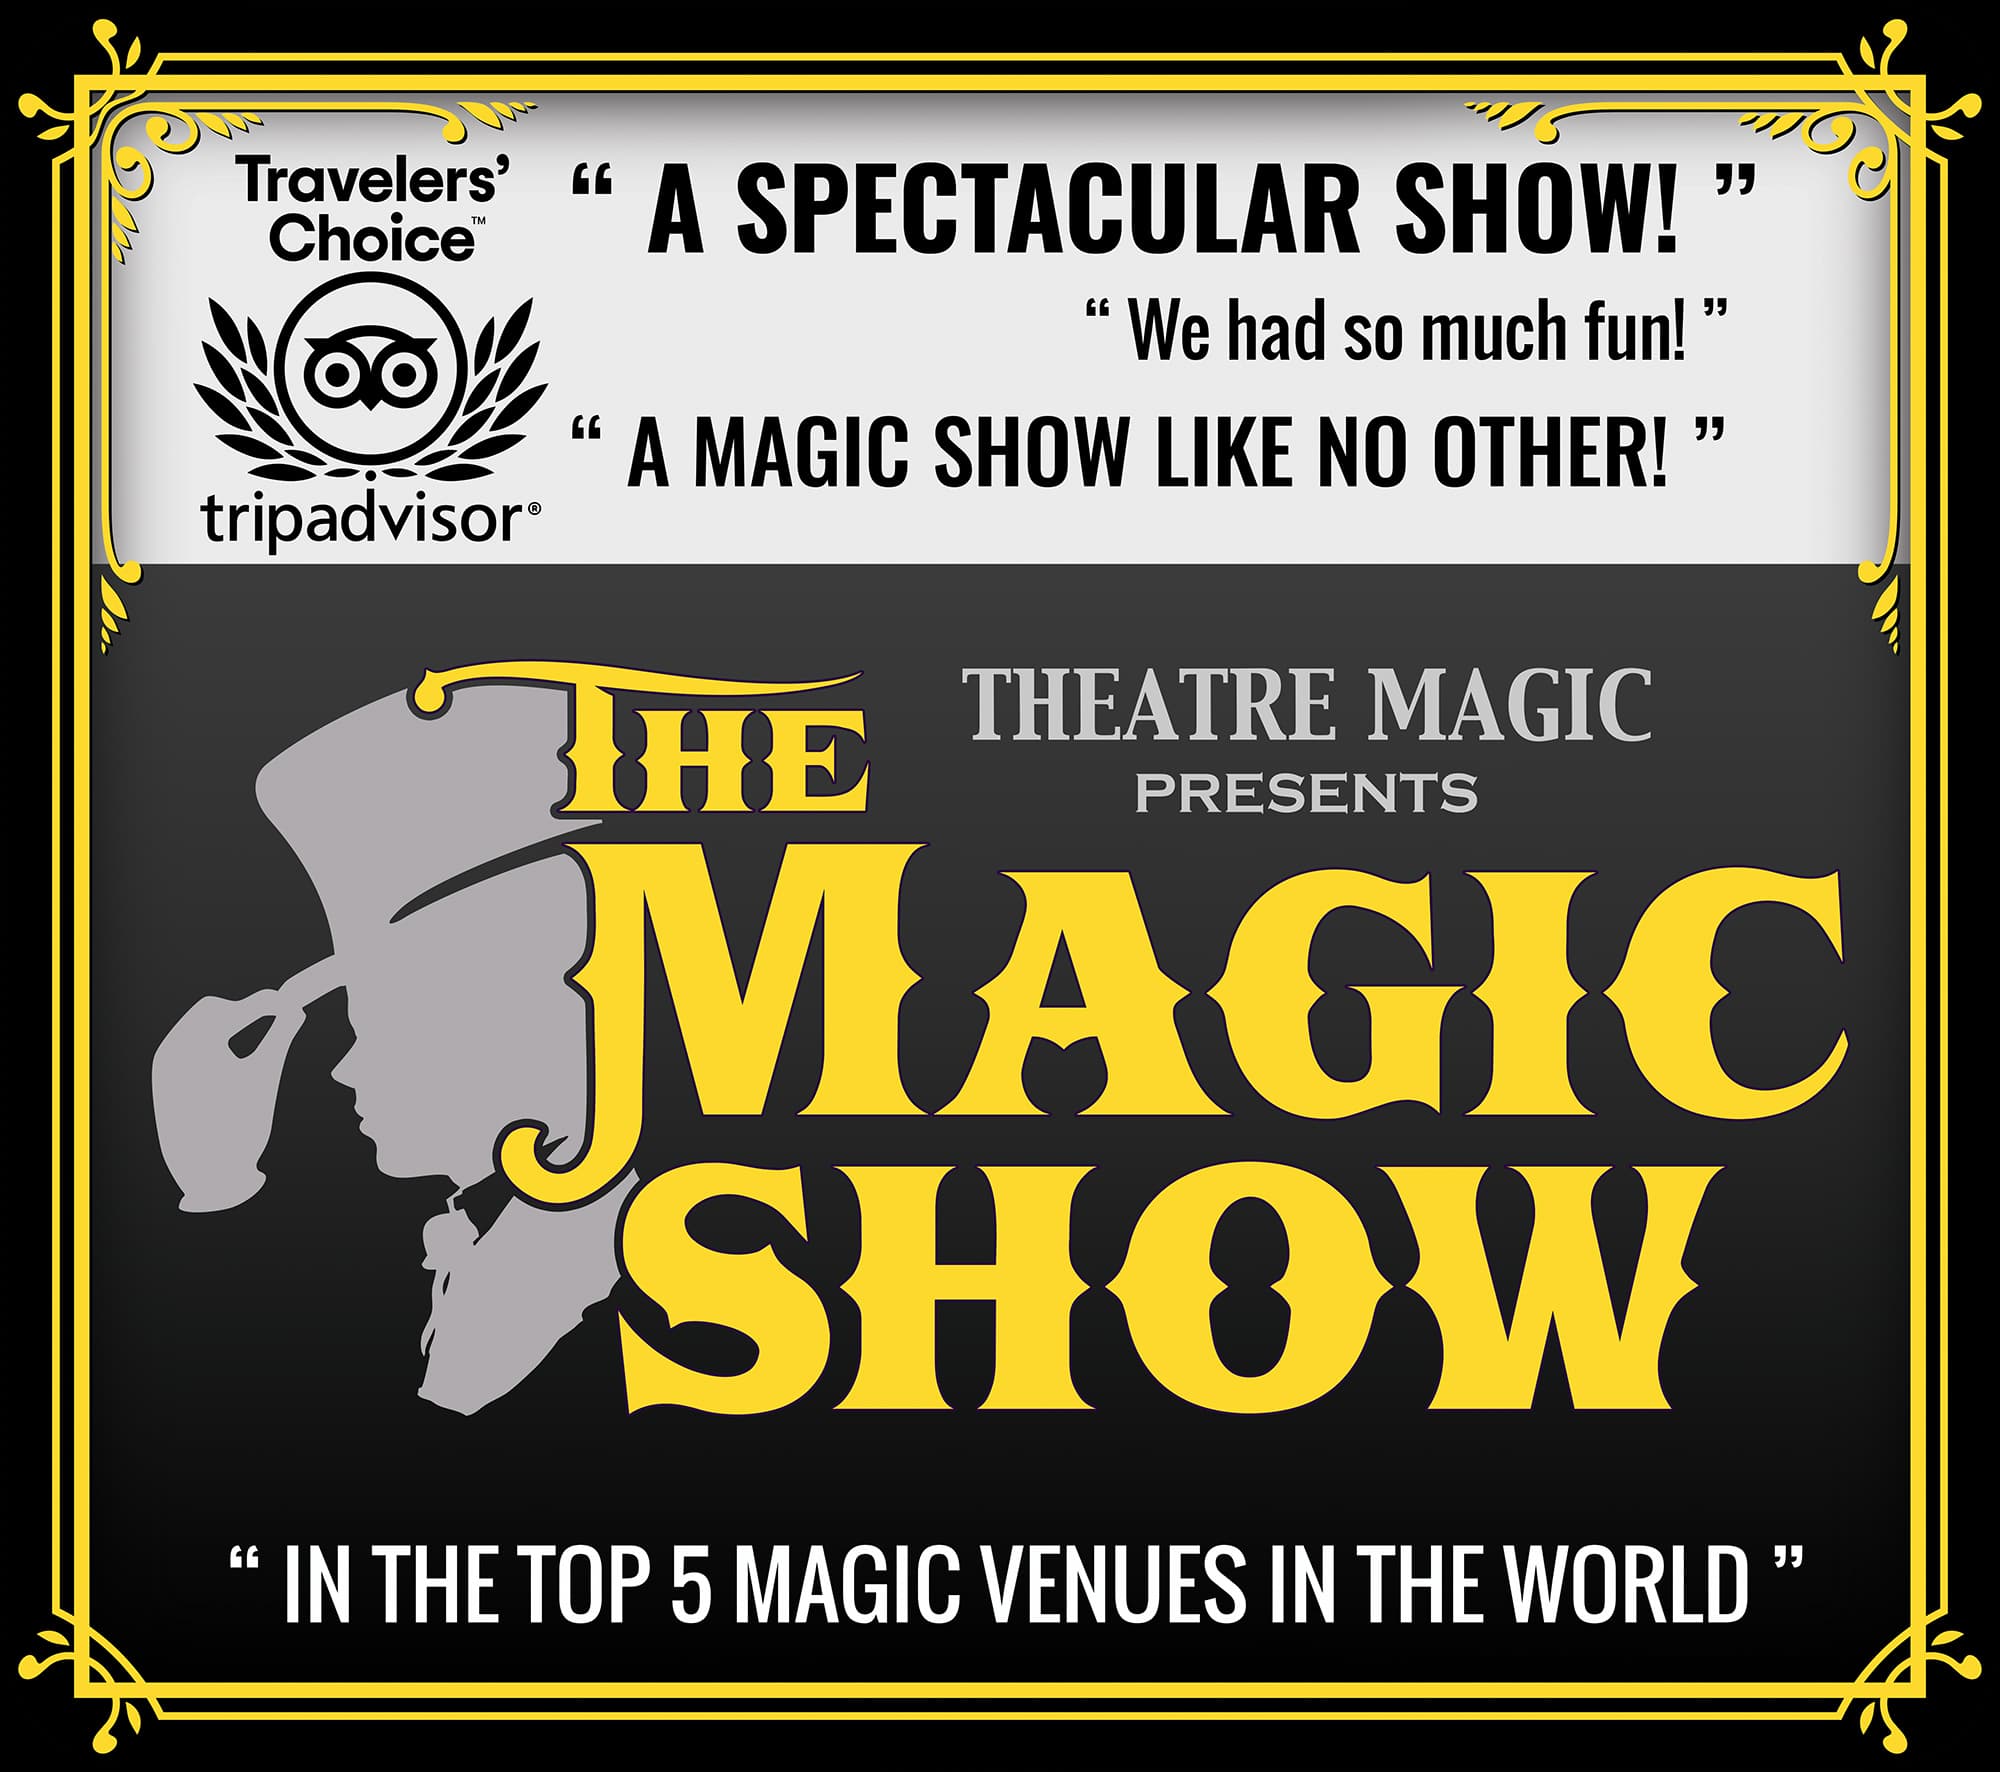 In the Top 5 Magic Shows of the World